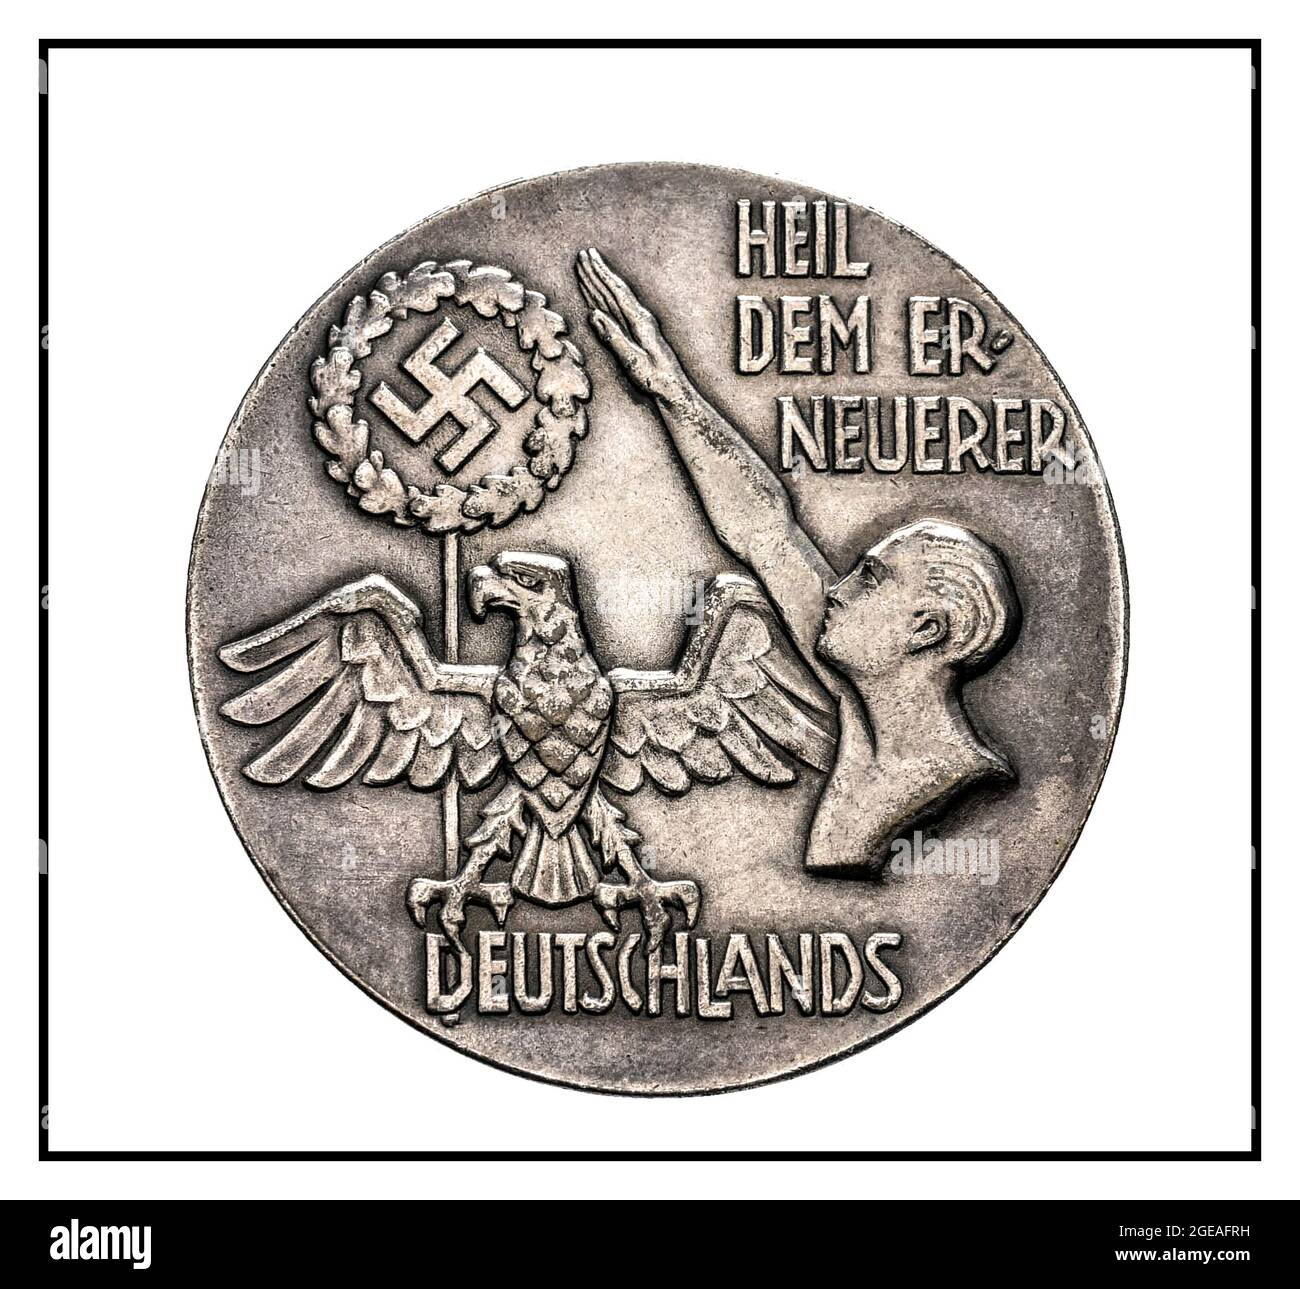 Heil to the renewer HEIL DEM ER NEUERER DEUTSCHLANDS medal propaganda plaque with German Eagle and Swastika with Heil Hitler salute 1930’s Nazi Germany commemorative award Stock Photo